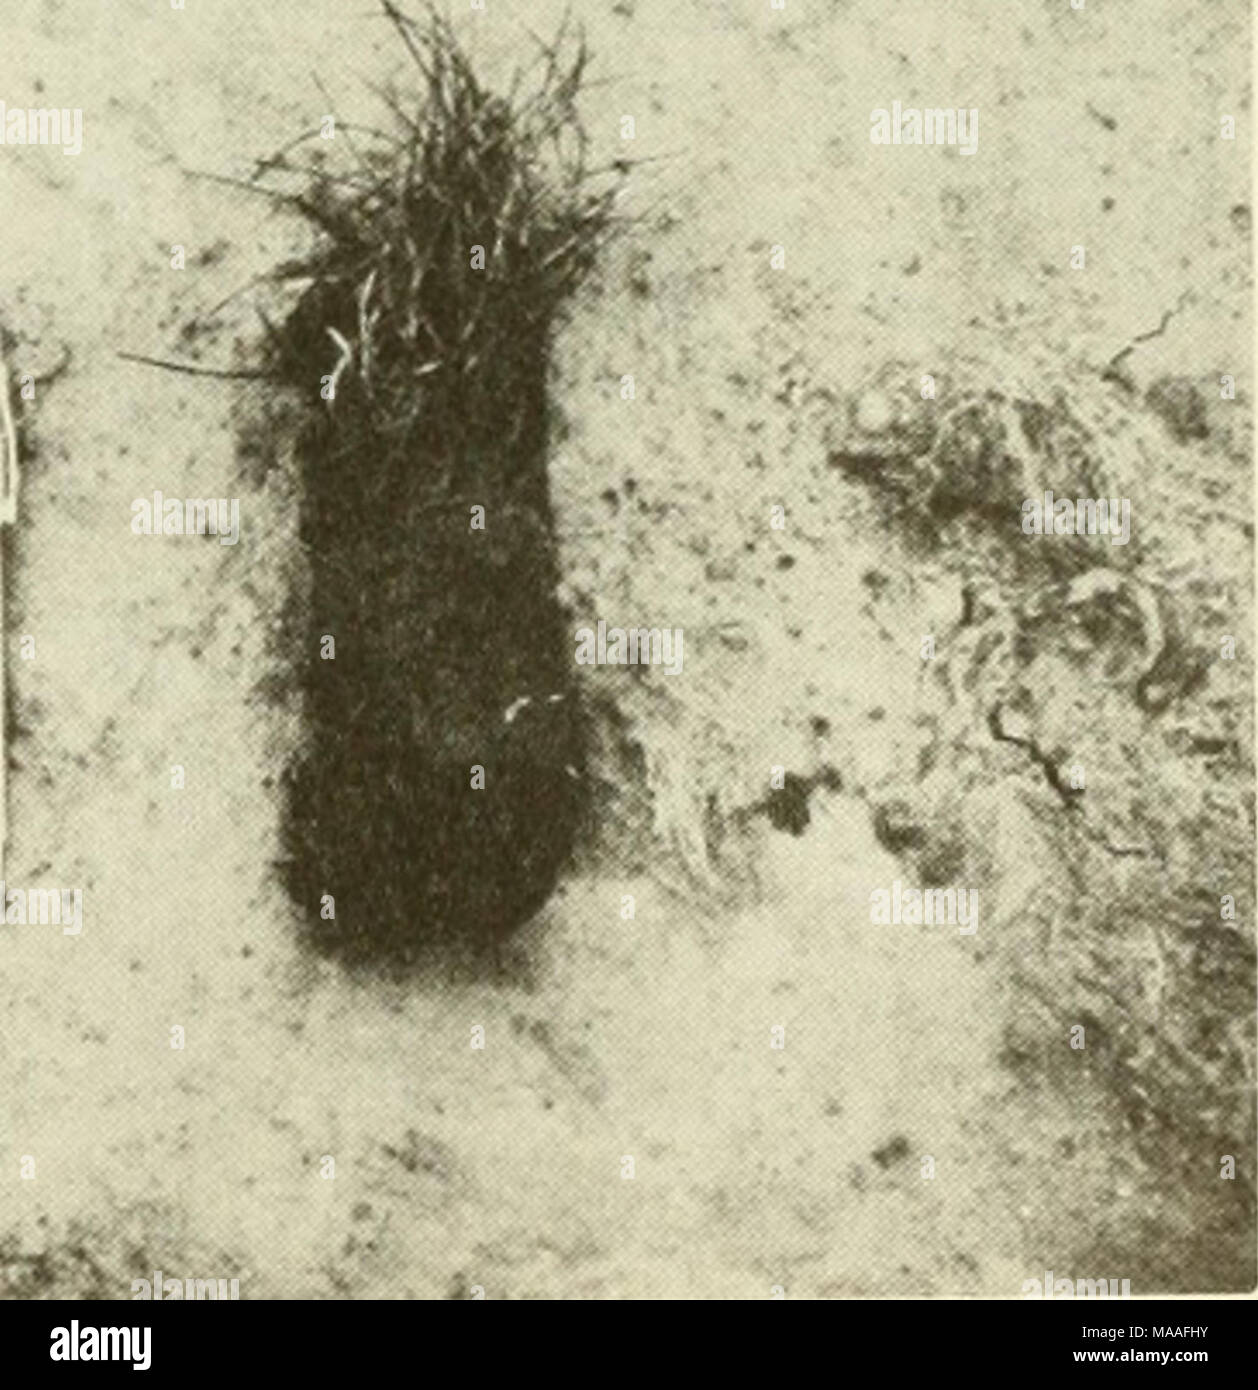 . Ecological study of the Amoco Cadiz oil spill : report of the NOAA-CNEXO Joint Scientific Commission . FIGURE 7. Transplants of Puccinellia: sprig on left, plug on right. 369 Stock Photo